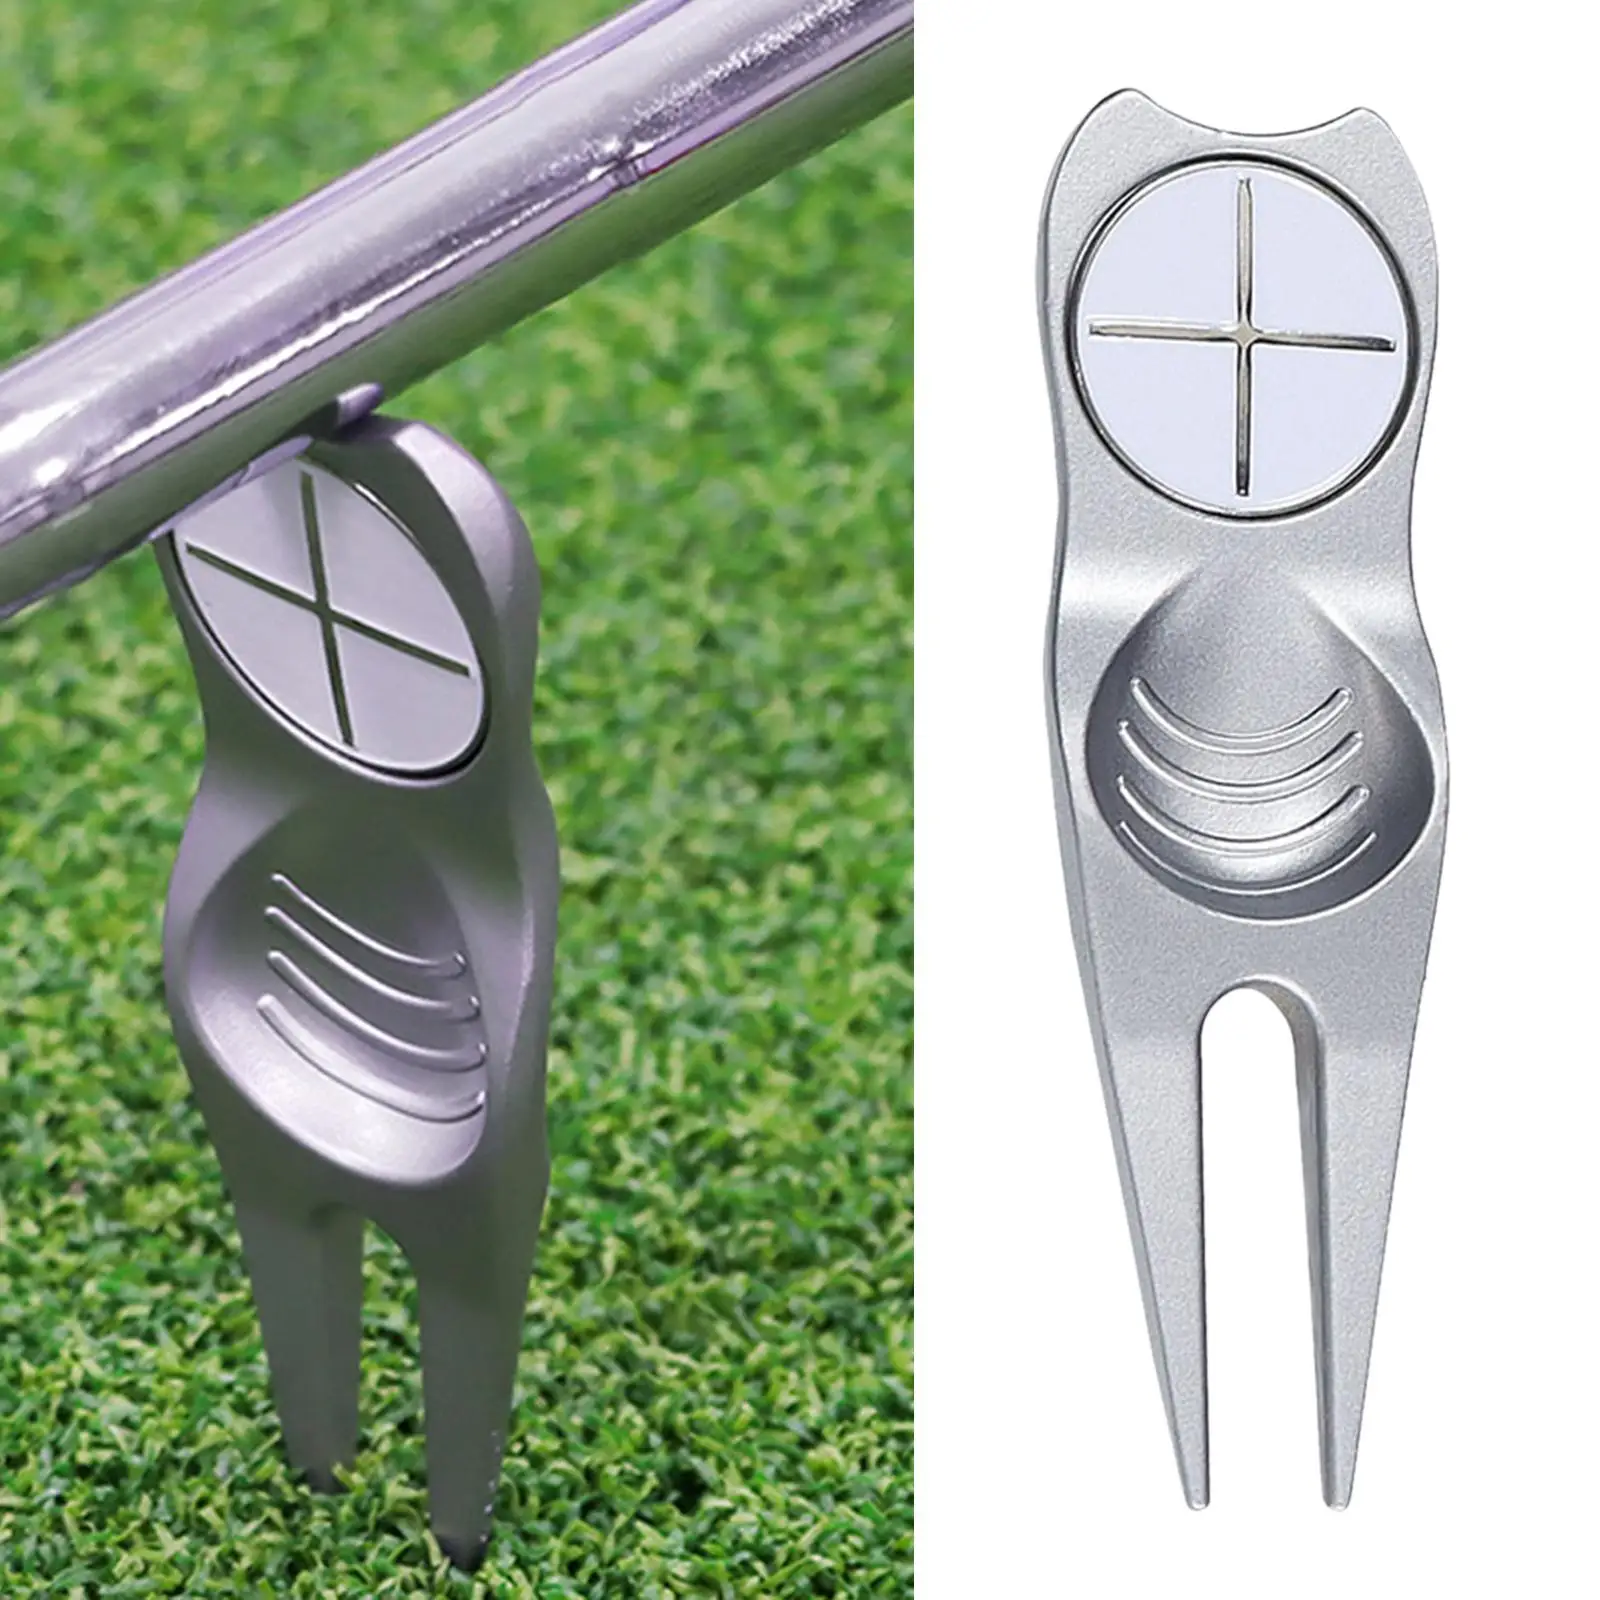 GolfTool and Ball Marker in Blue and White, Zinc Alloy Lightweight Putting Tool